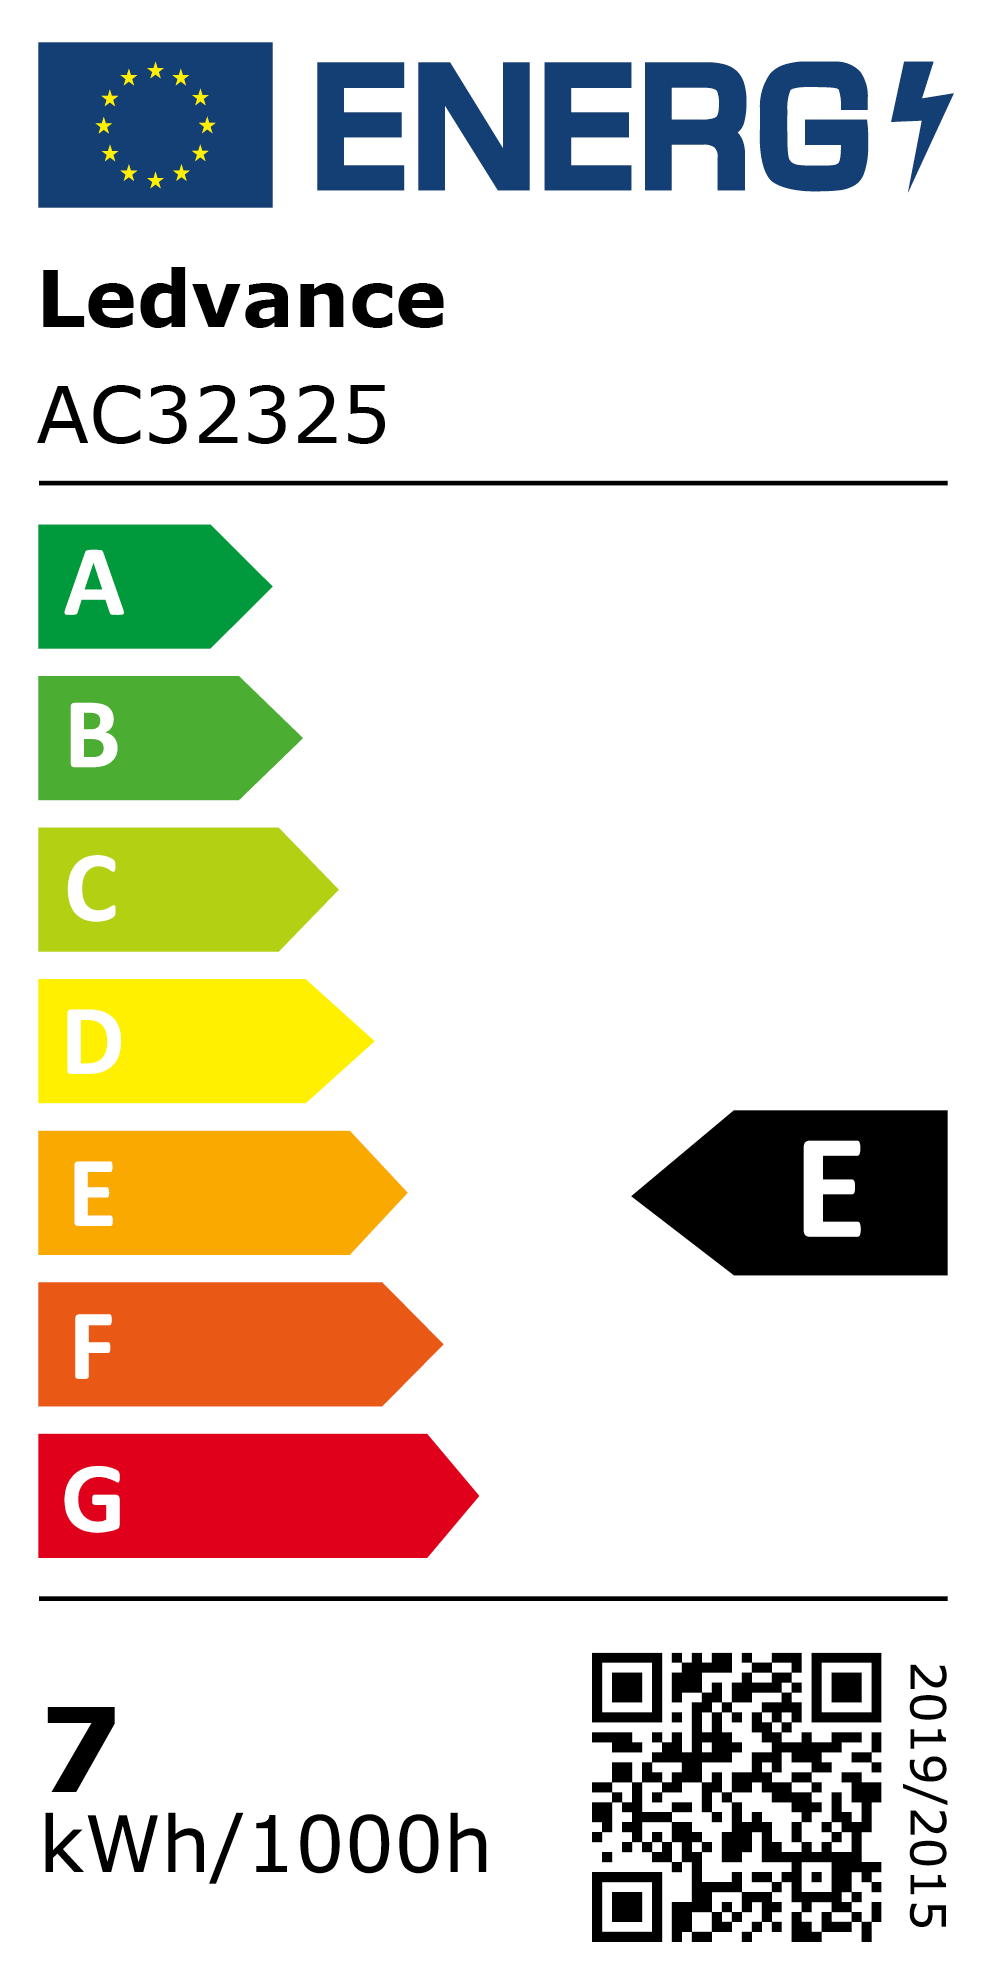 New 2021 Energy Rating Label: MPN AC32325